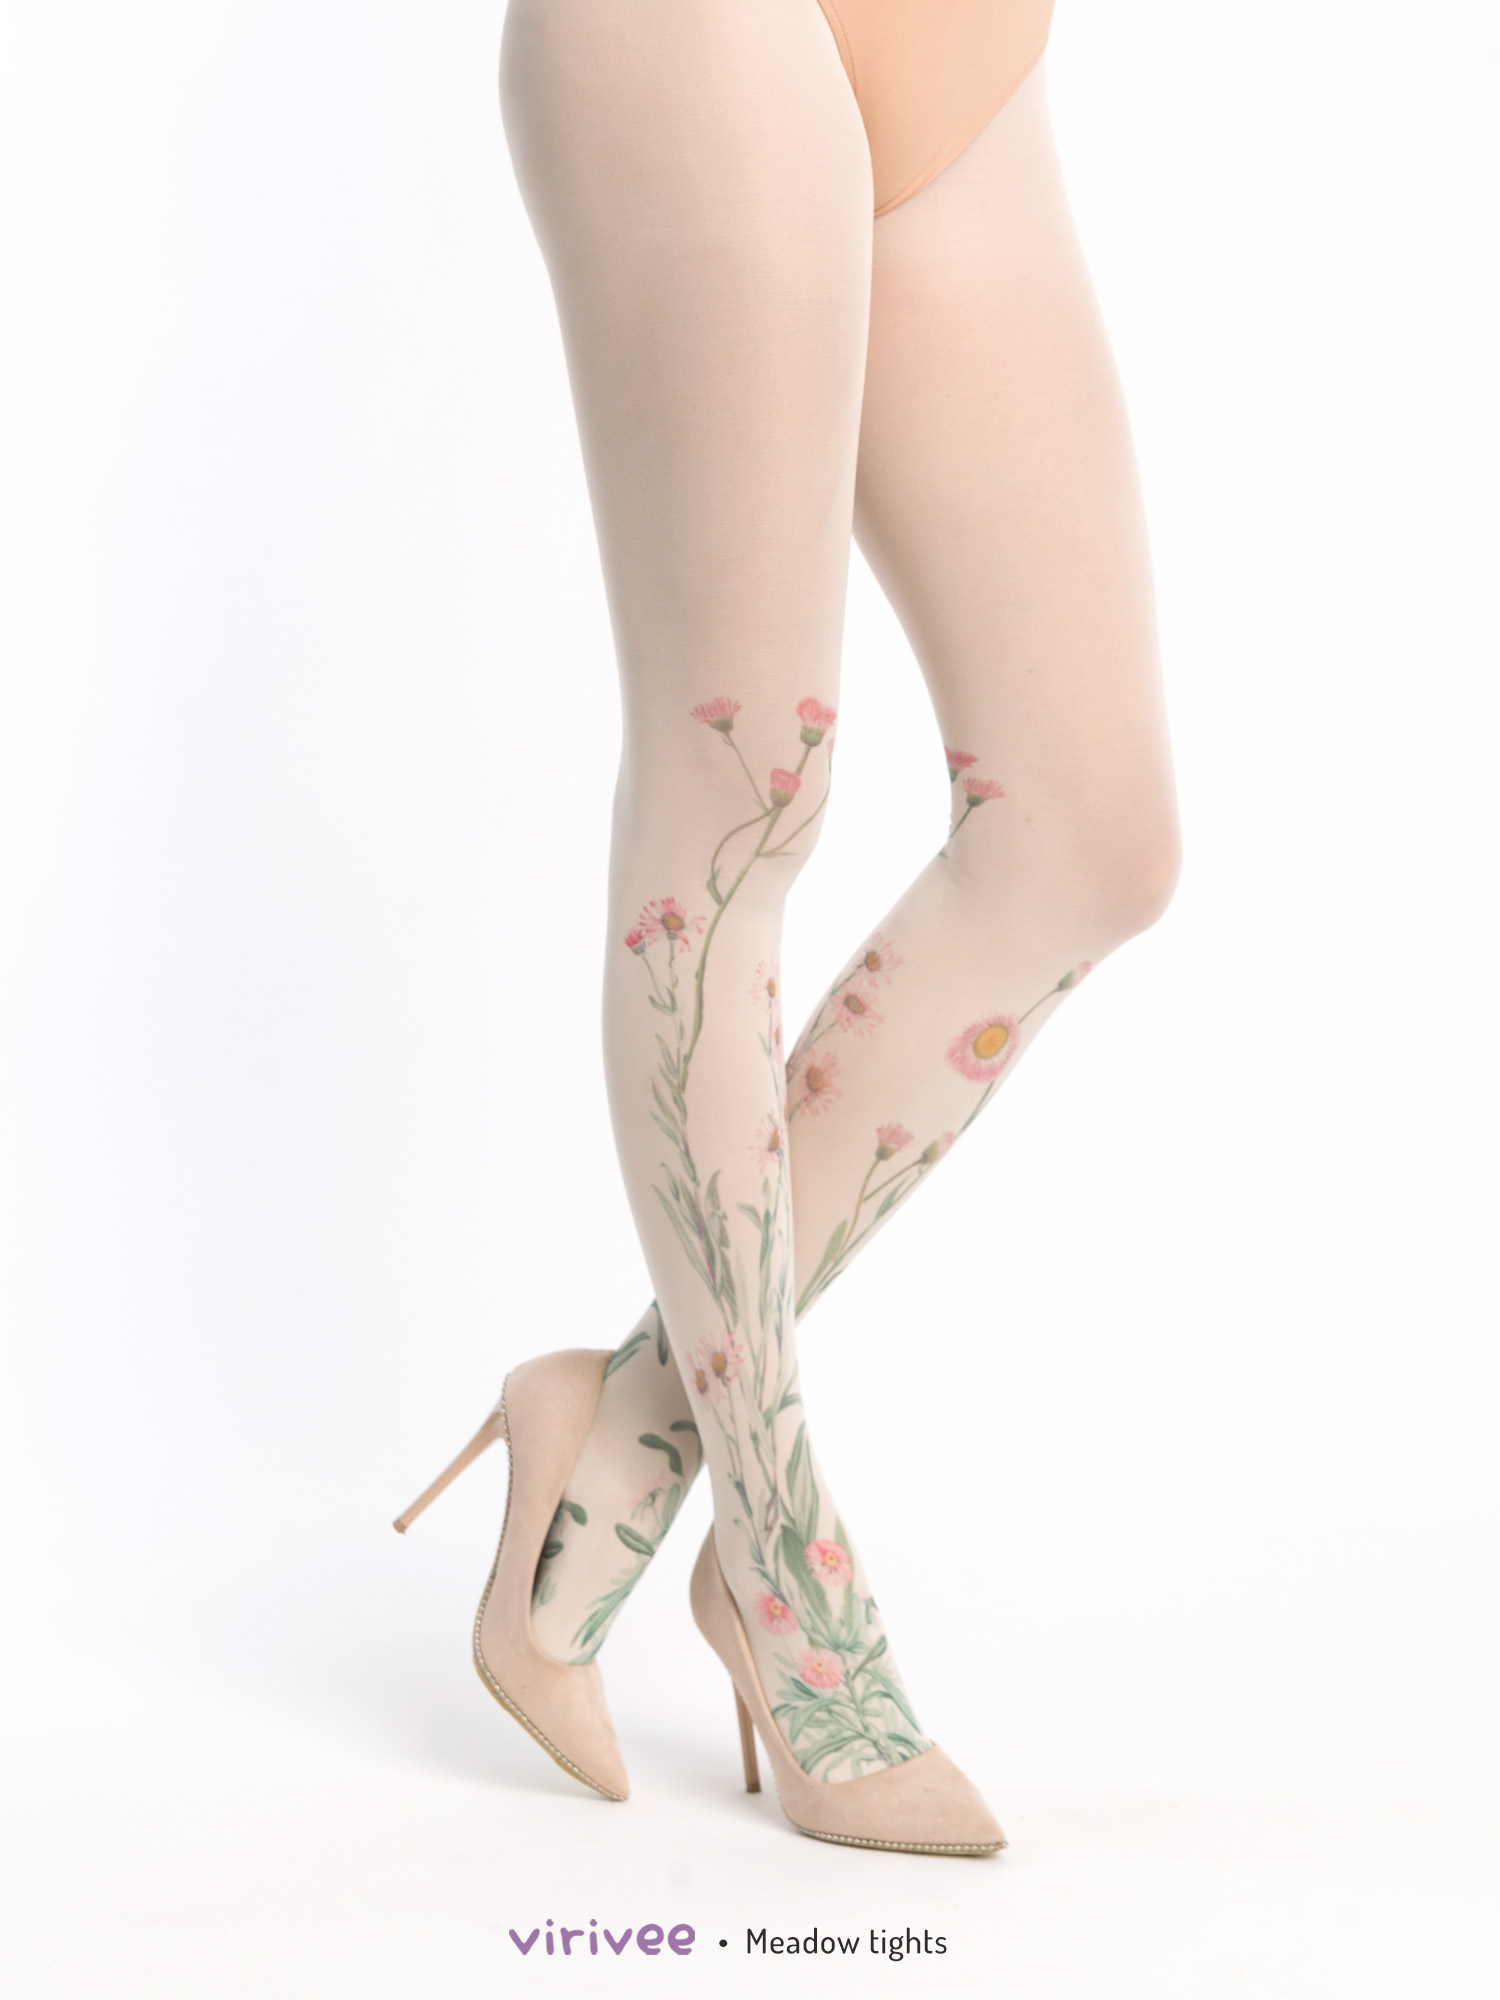 Colourful meadow tights by Virivee